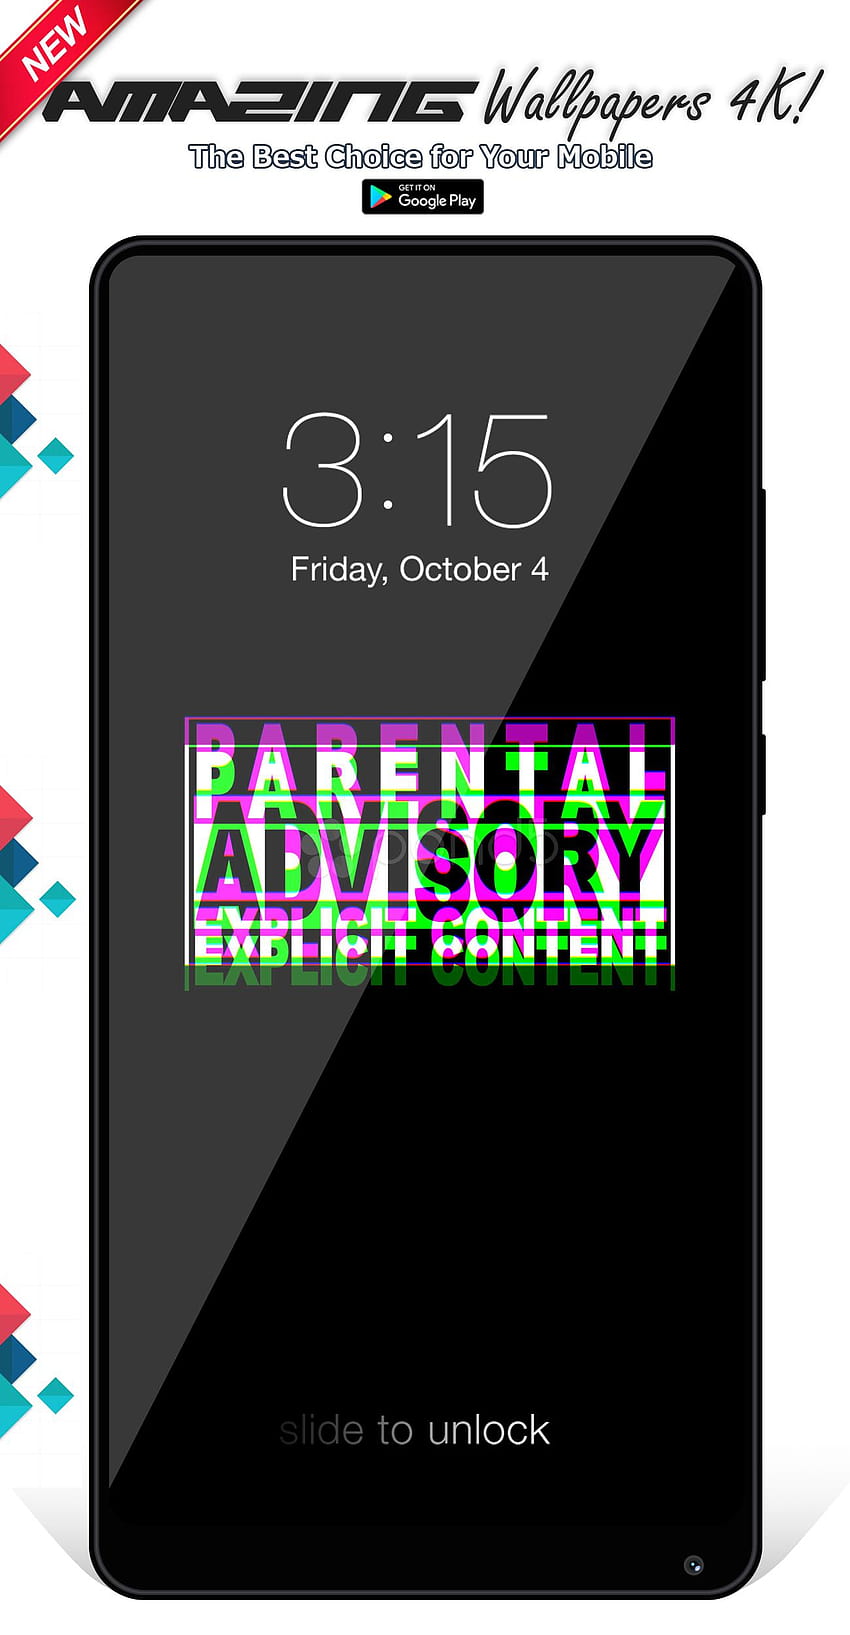 Parental Advisory for Android HD phone wallpaper